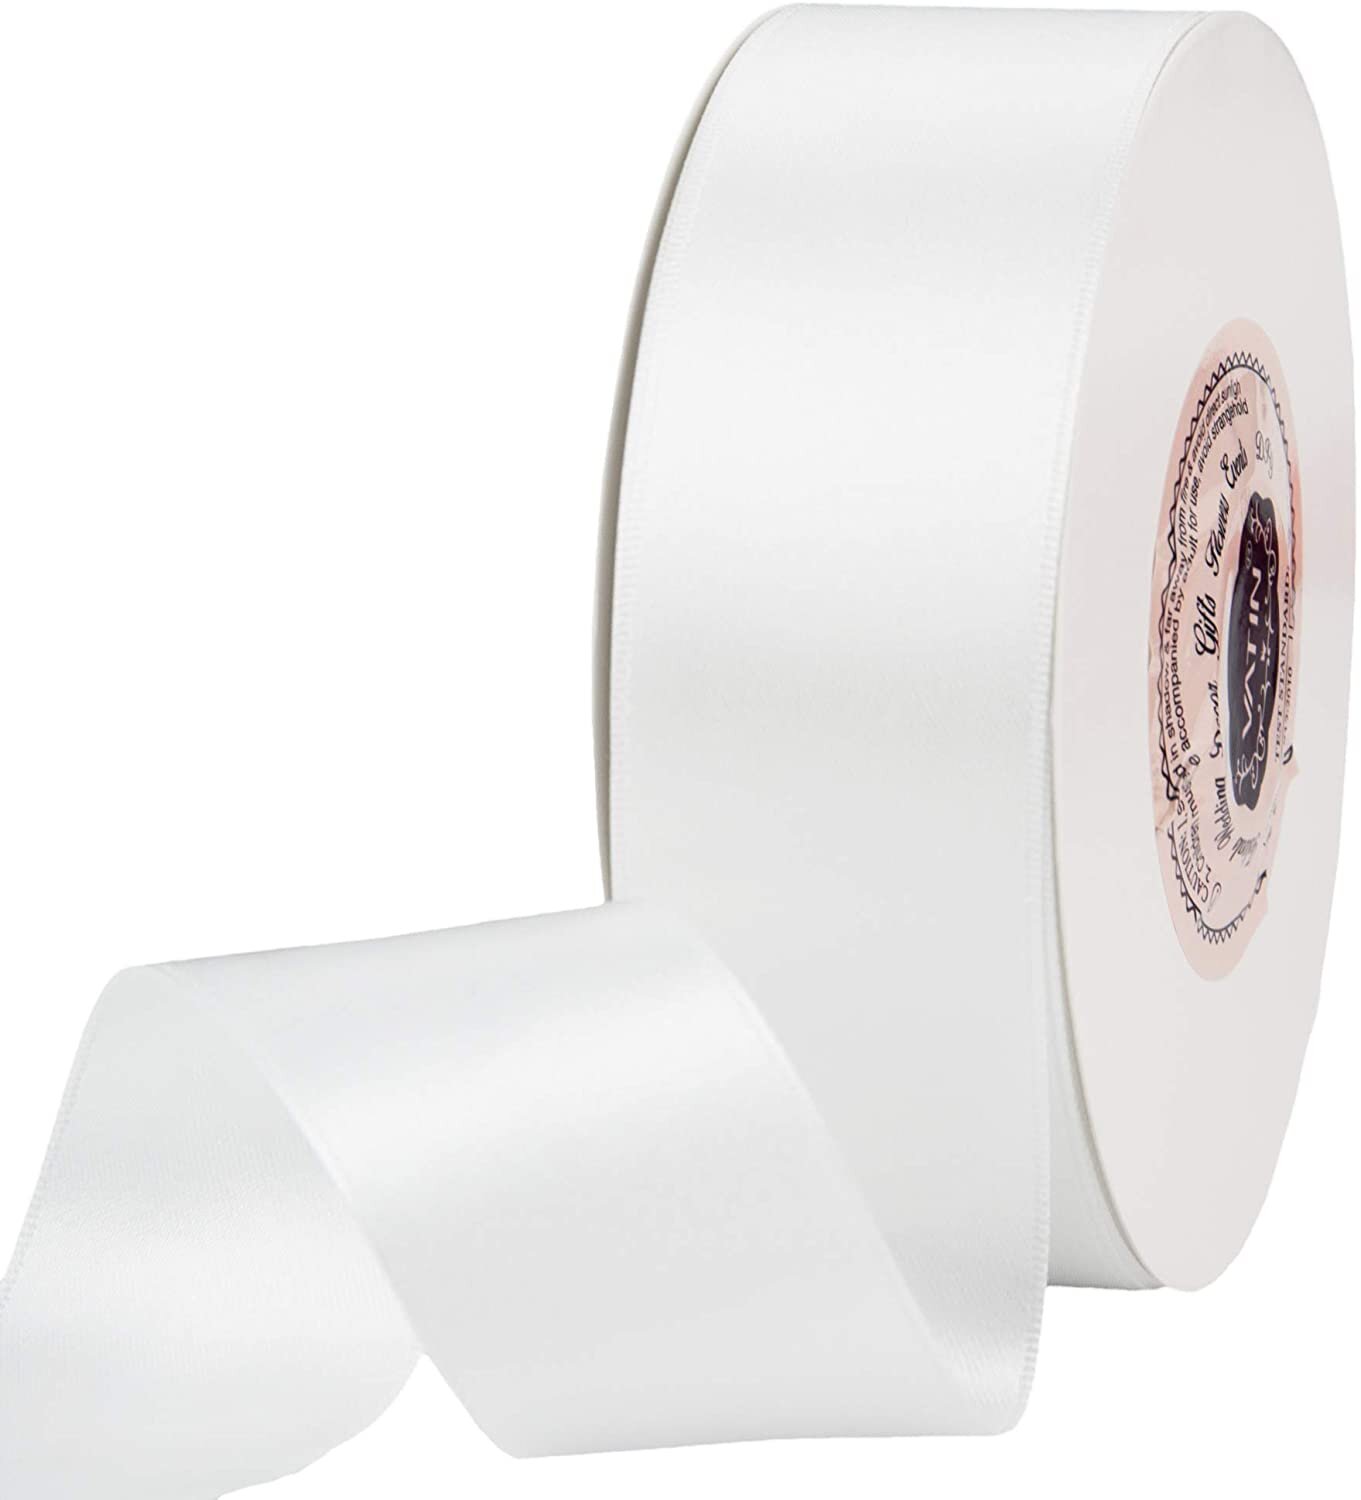 VATIN 1-1:2 inch Wide Double Face Solid Satin Ribbon Roll.jpg